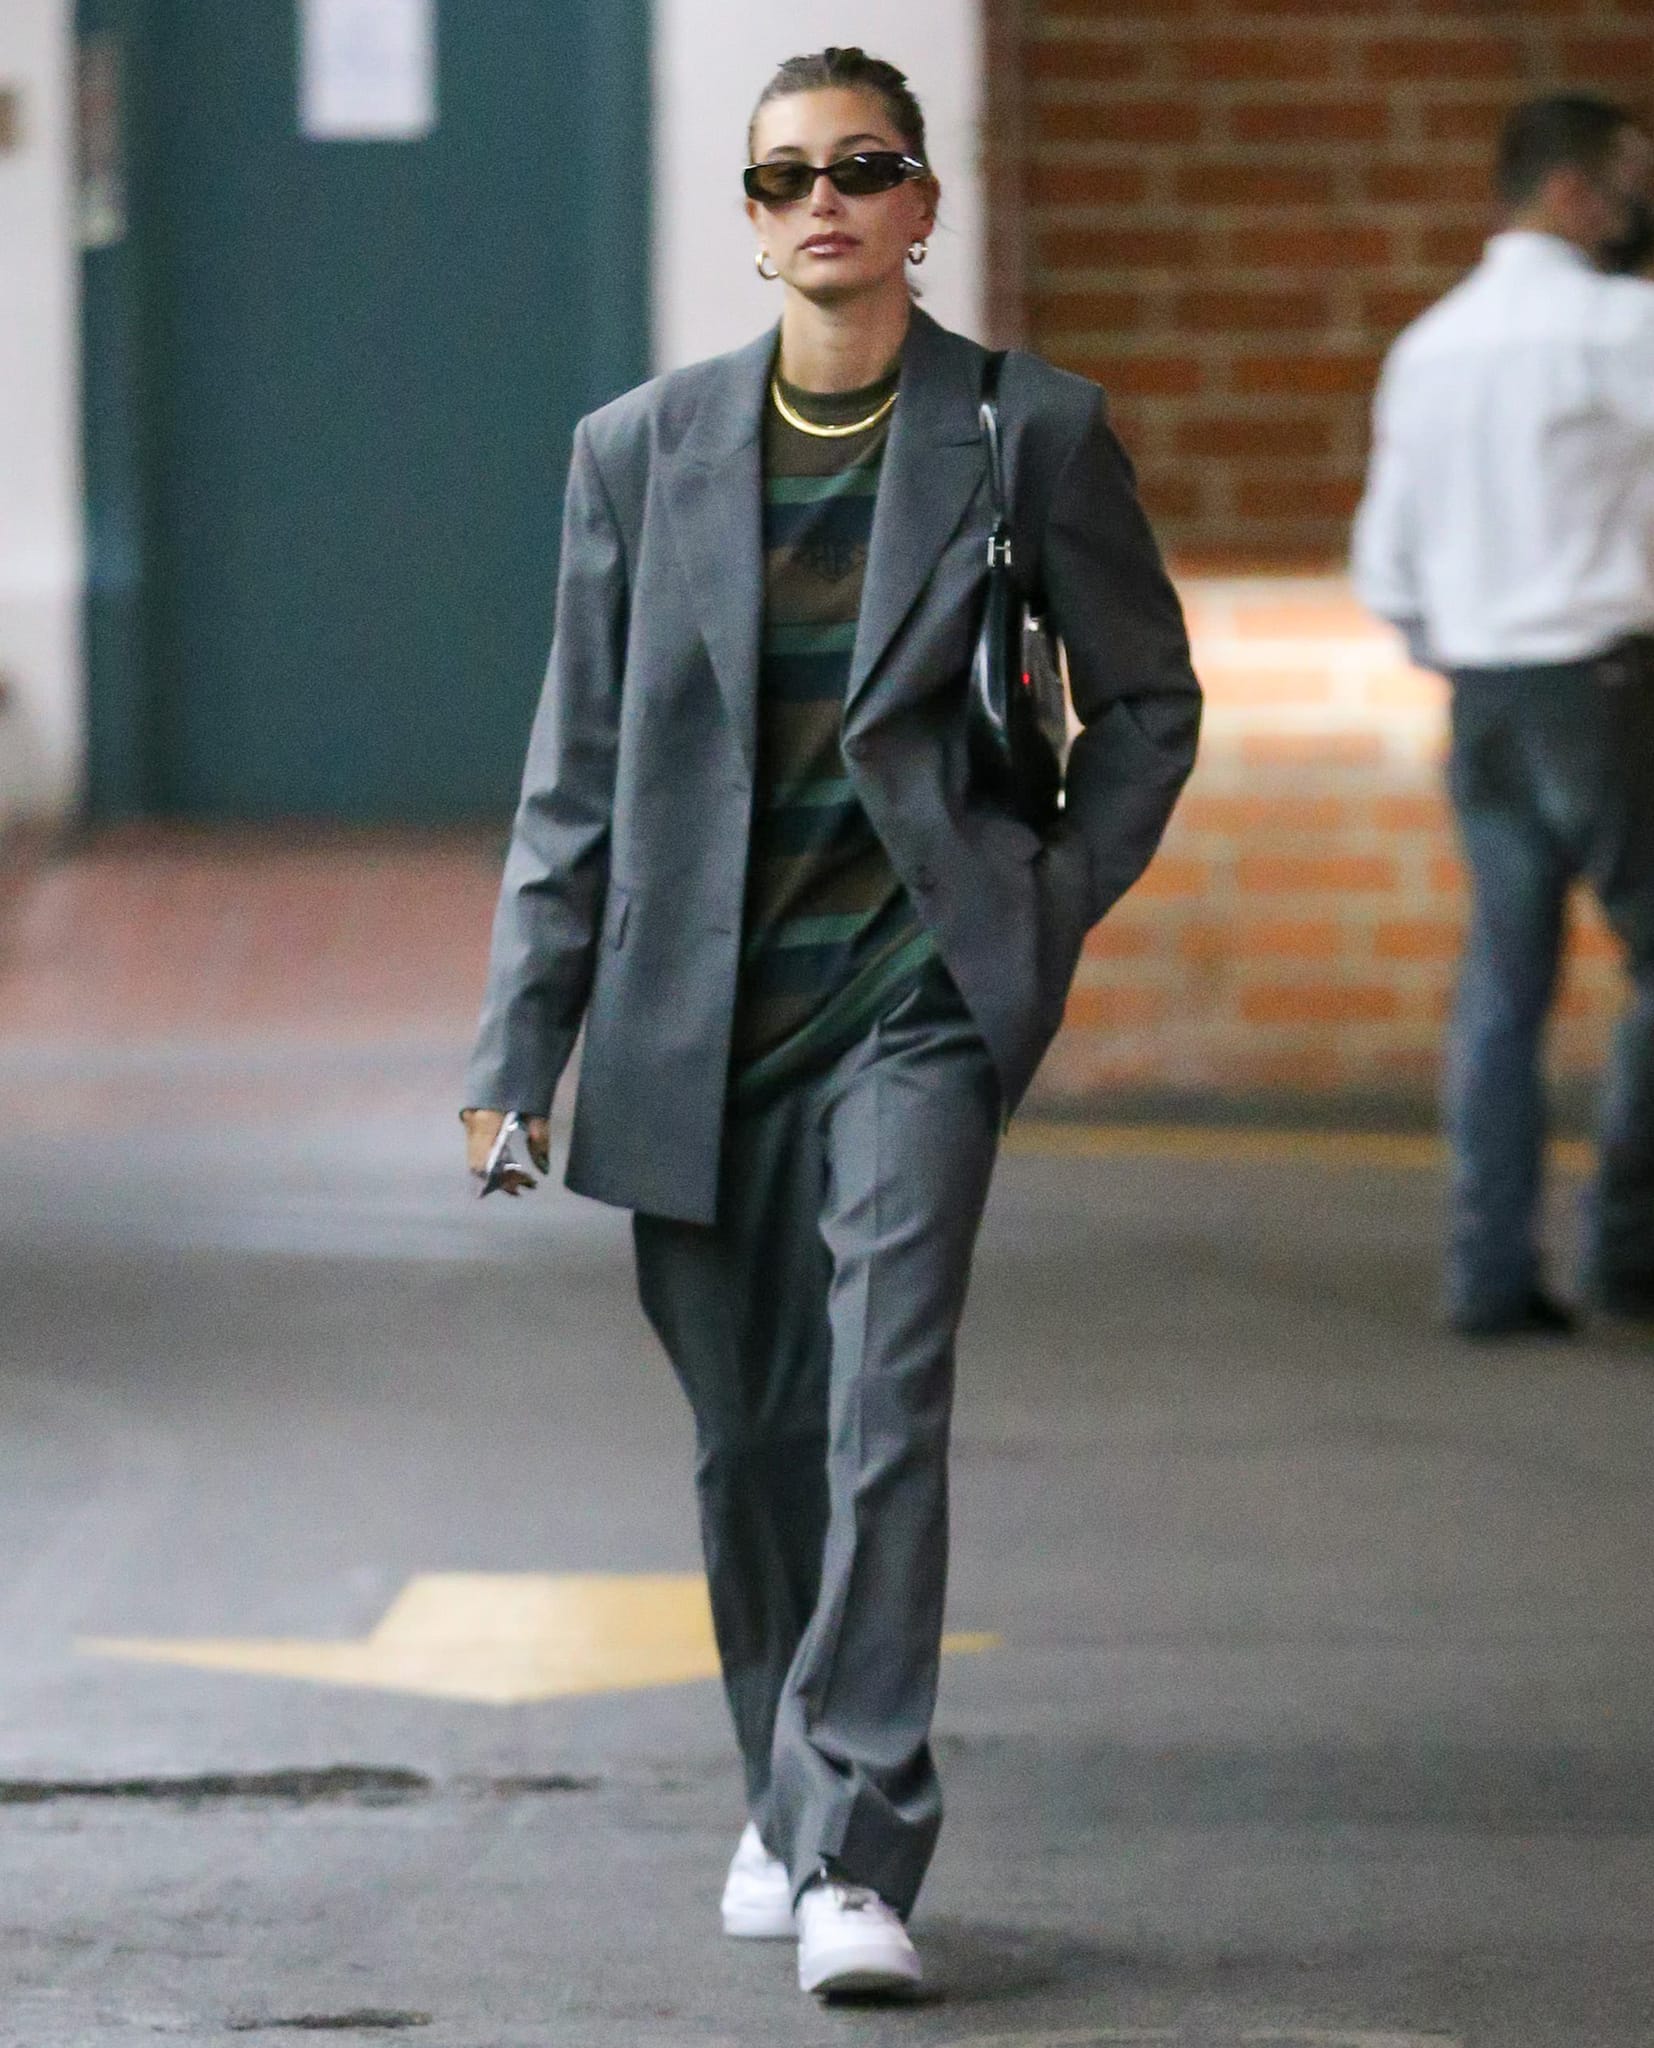 Hailey Bieber goes for androgynous chic while leaving a medical building in Beverly Hills on October 19, 2021